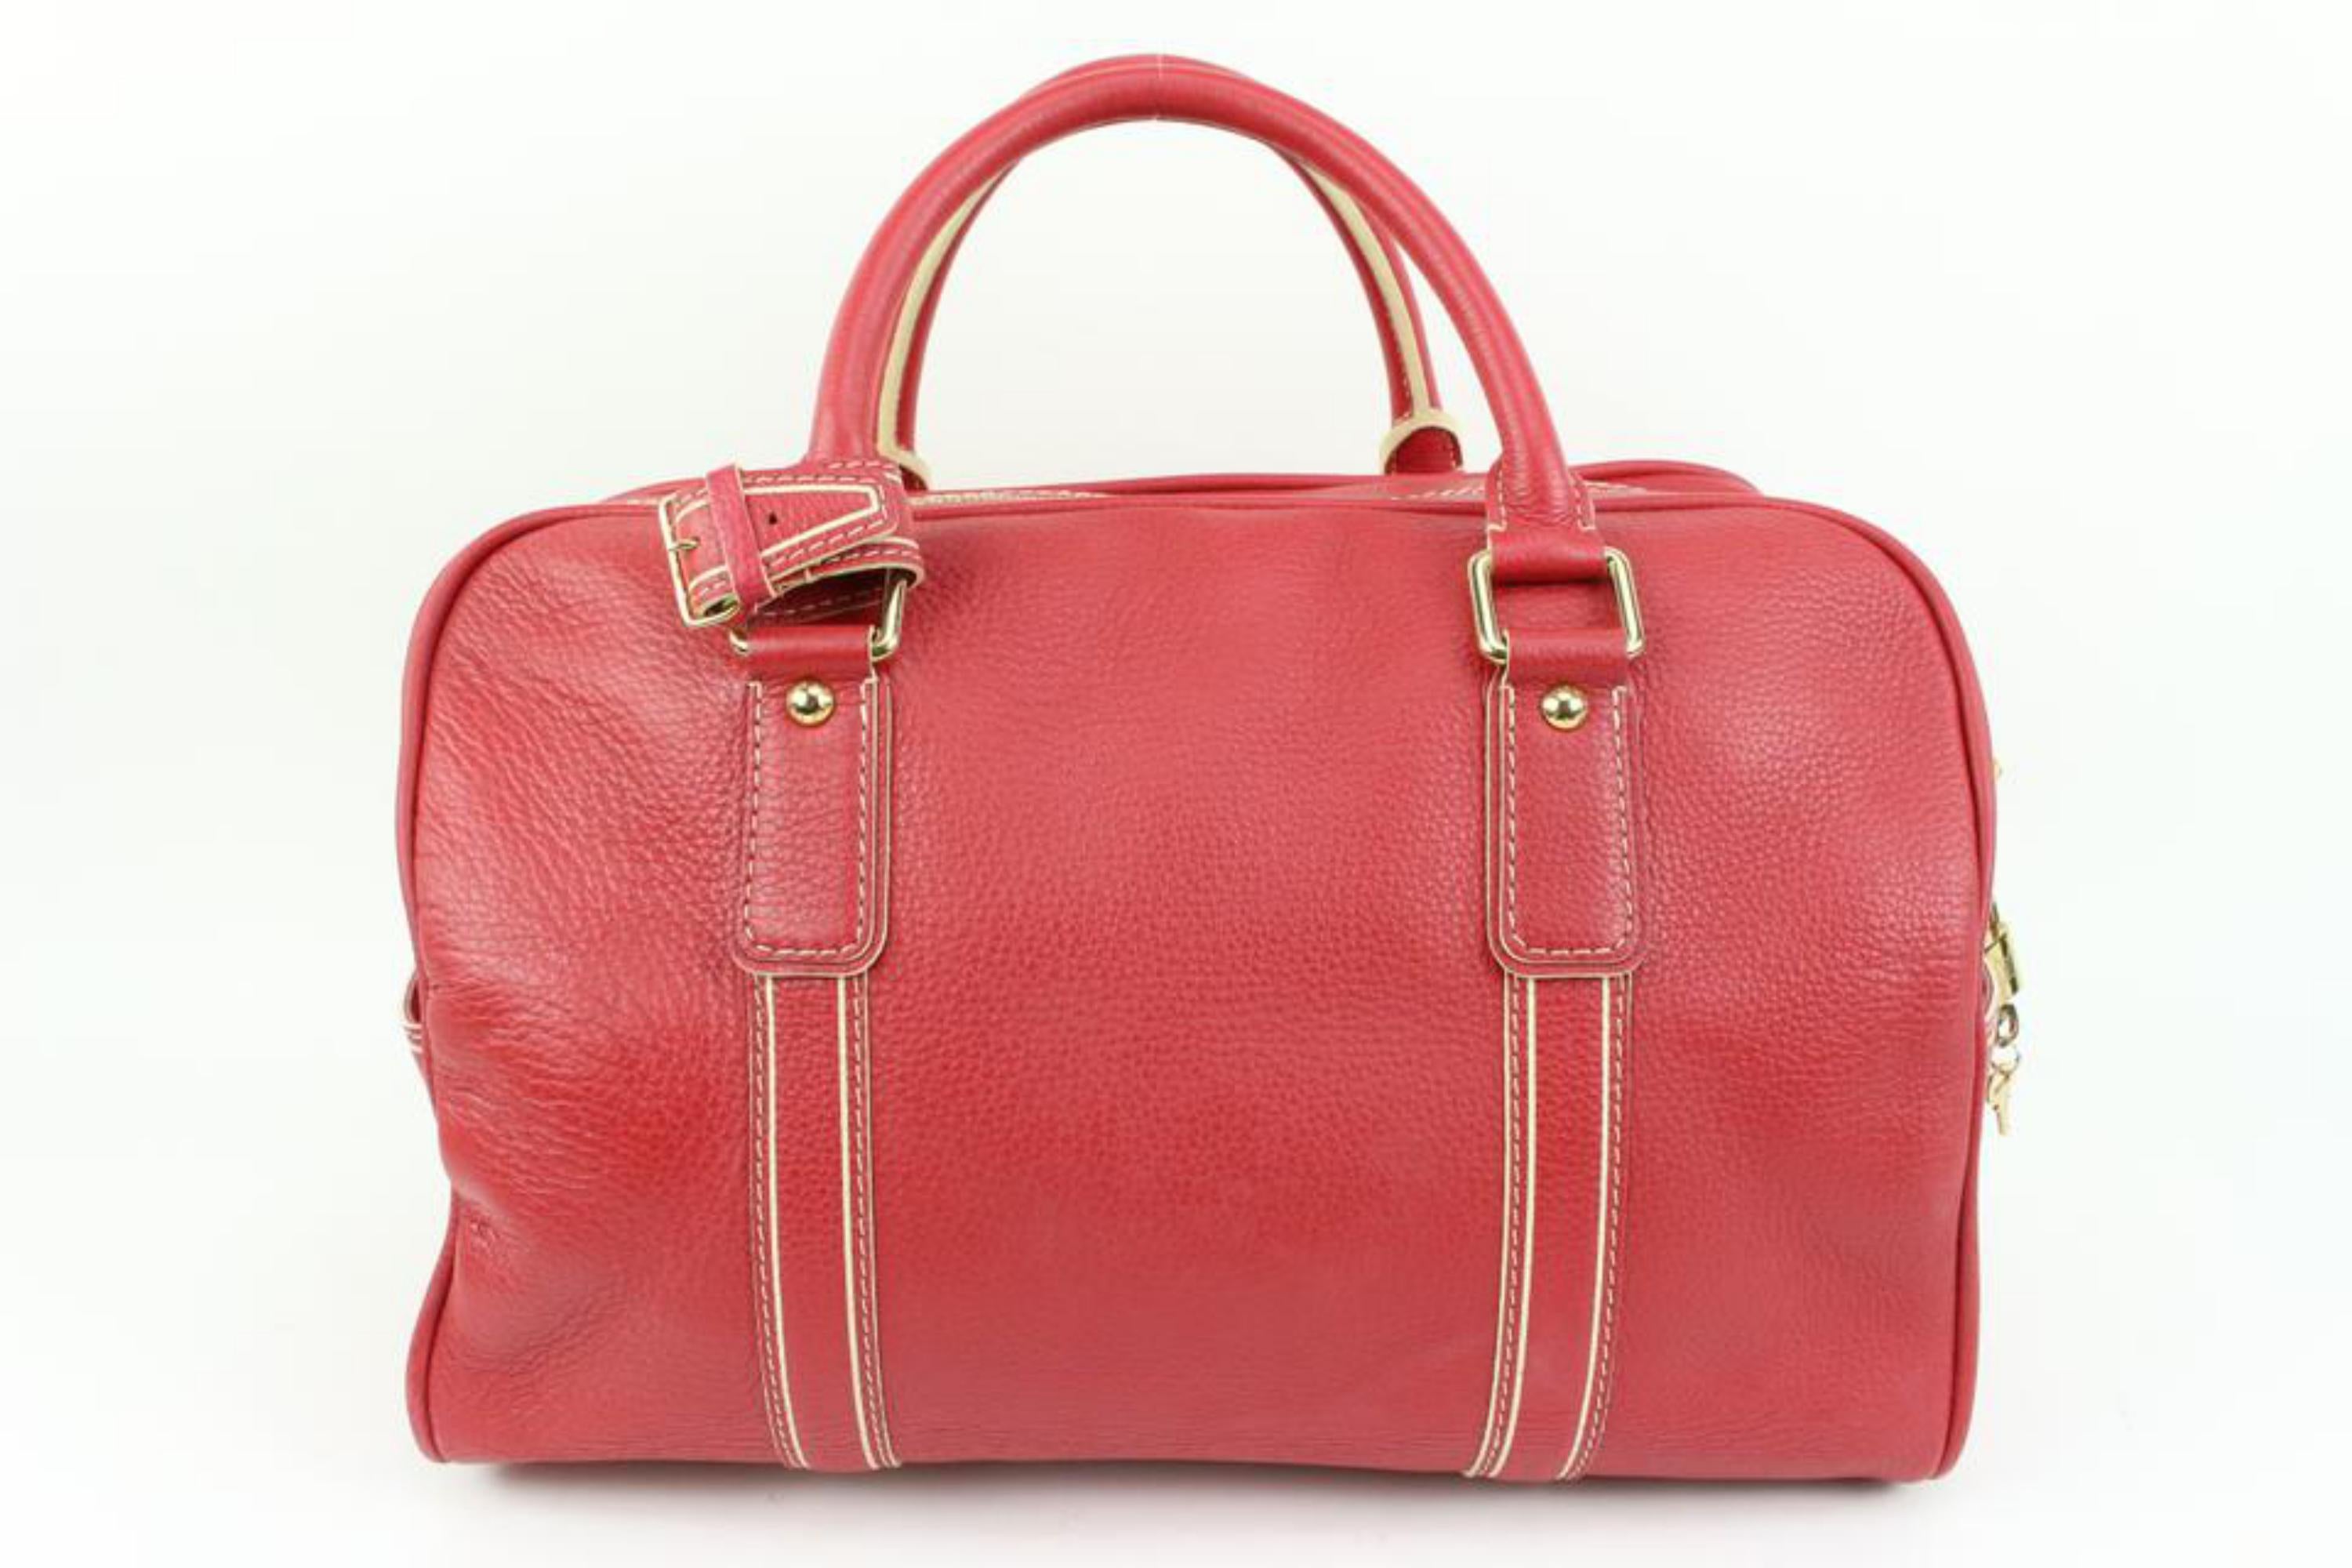 Louis Vuitton Red Tobago Leather Carryall Boston Duffle 40lk324s 1